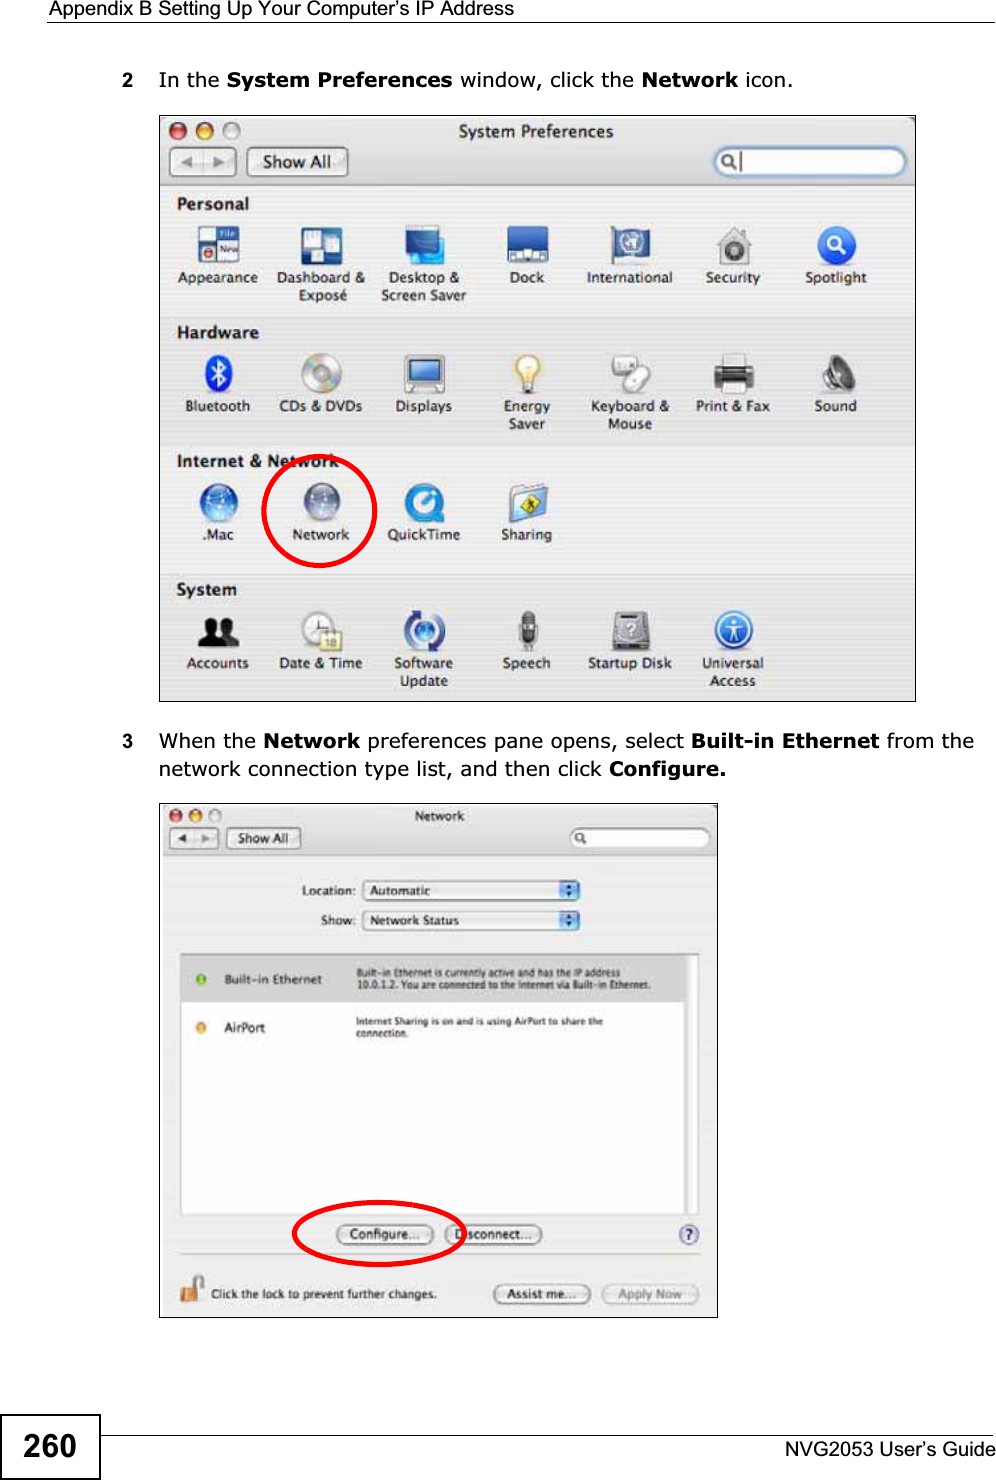 Appendix B Setting Up Your Computer’s IP AddressNVG2053 User’s Guide2602In the System Preferences window, click the Network icon.3When the Network preferences pane opens, select Built-in Ethernet from the network connection type list, and then click Configure.